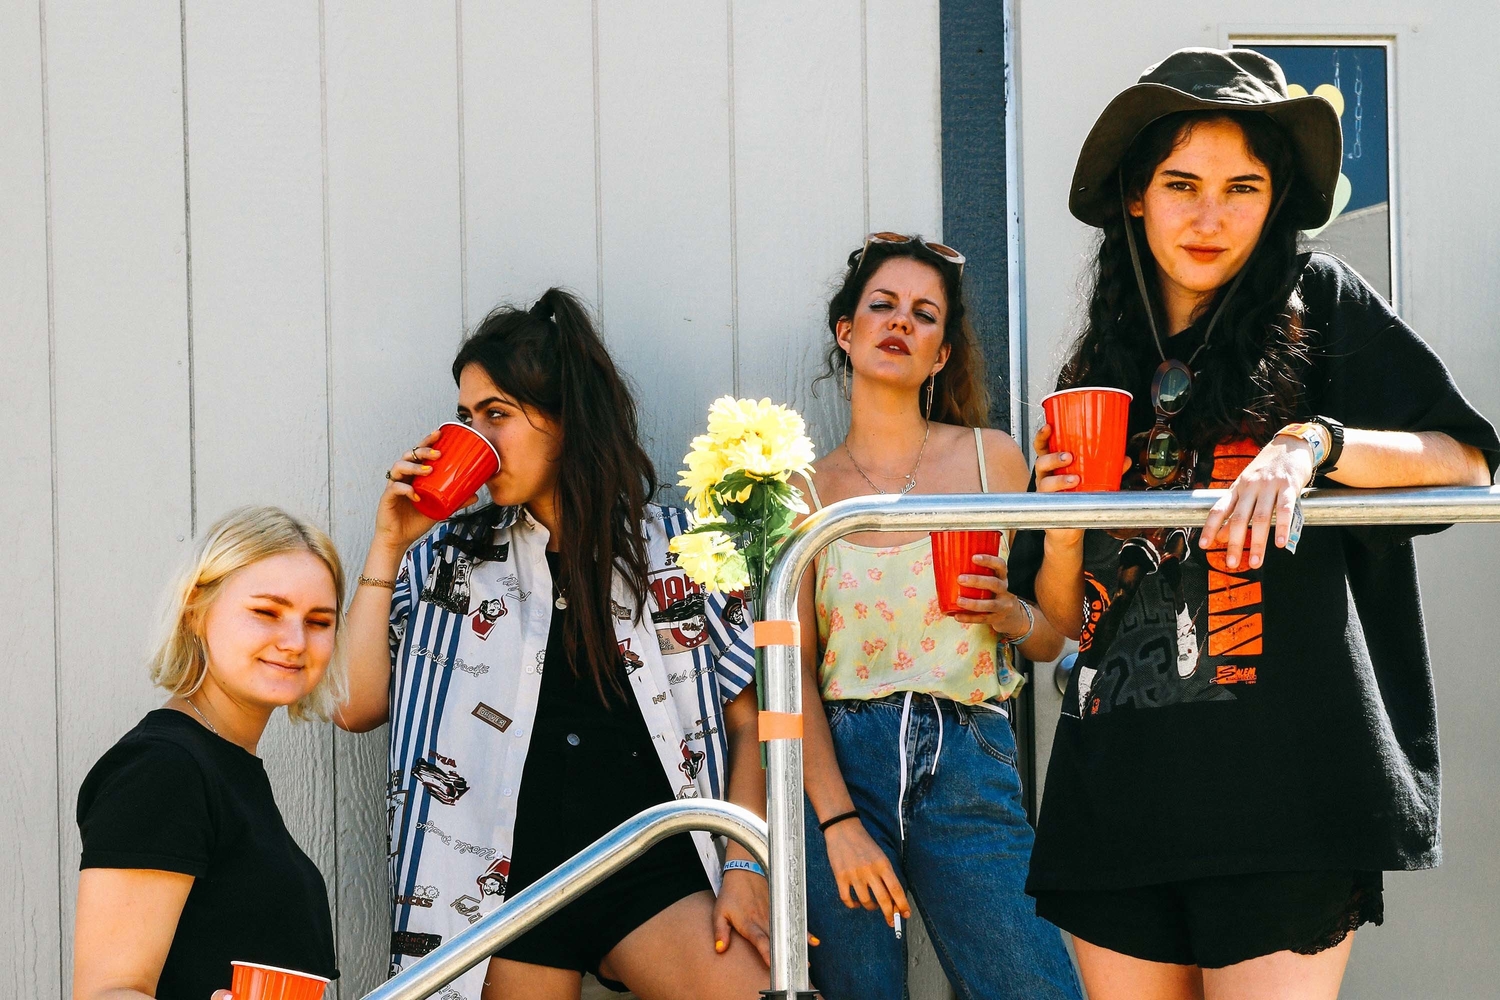 Listen to Hinds cover Kevin Ayers’ ‘Caribbean Moon’ • News • DIY Magazine